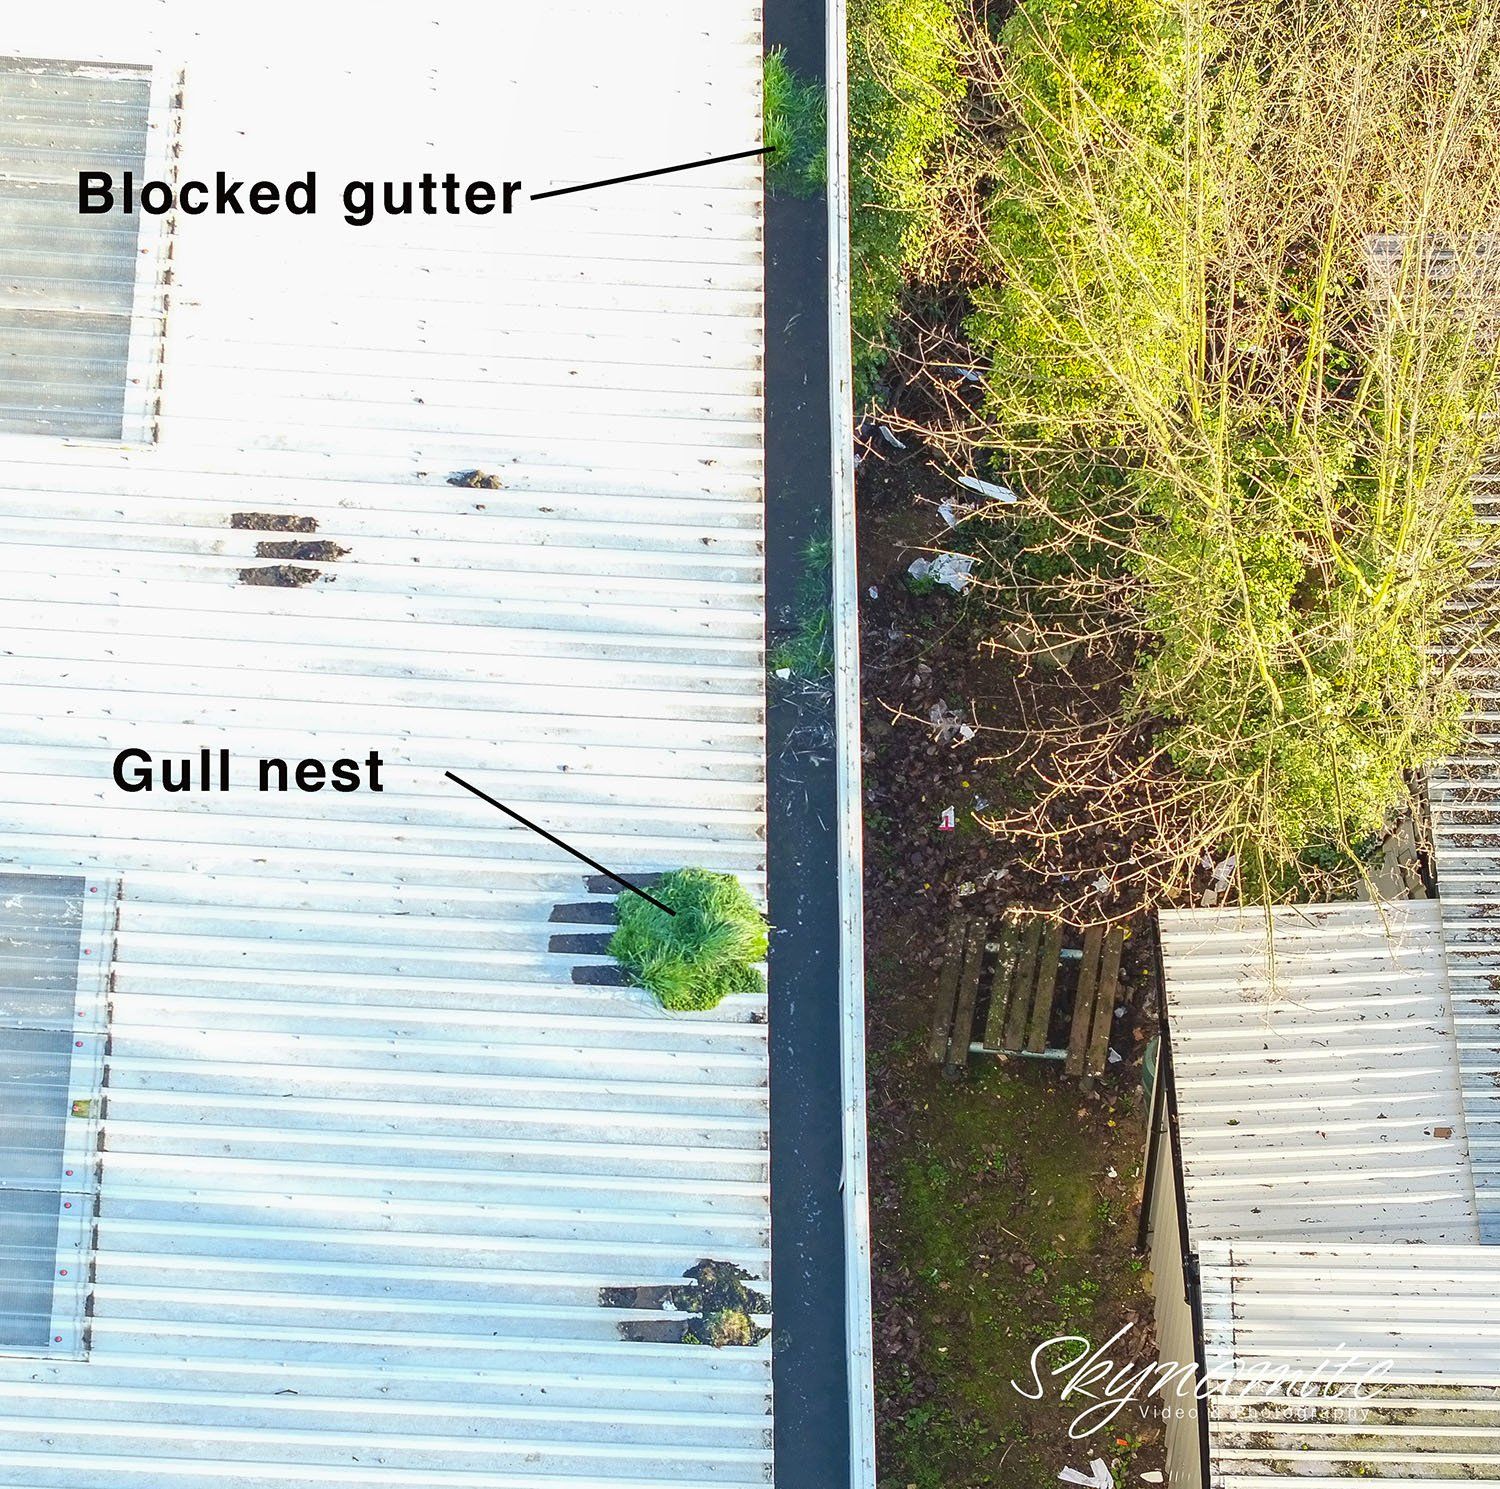 An aerial inspection picture of a factory roof with a blocked gutter and gull nest